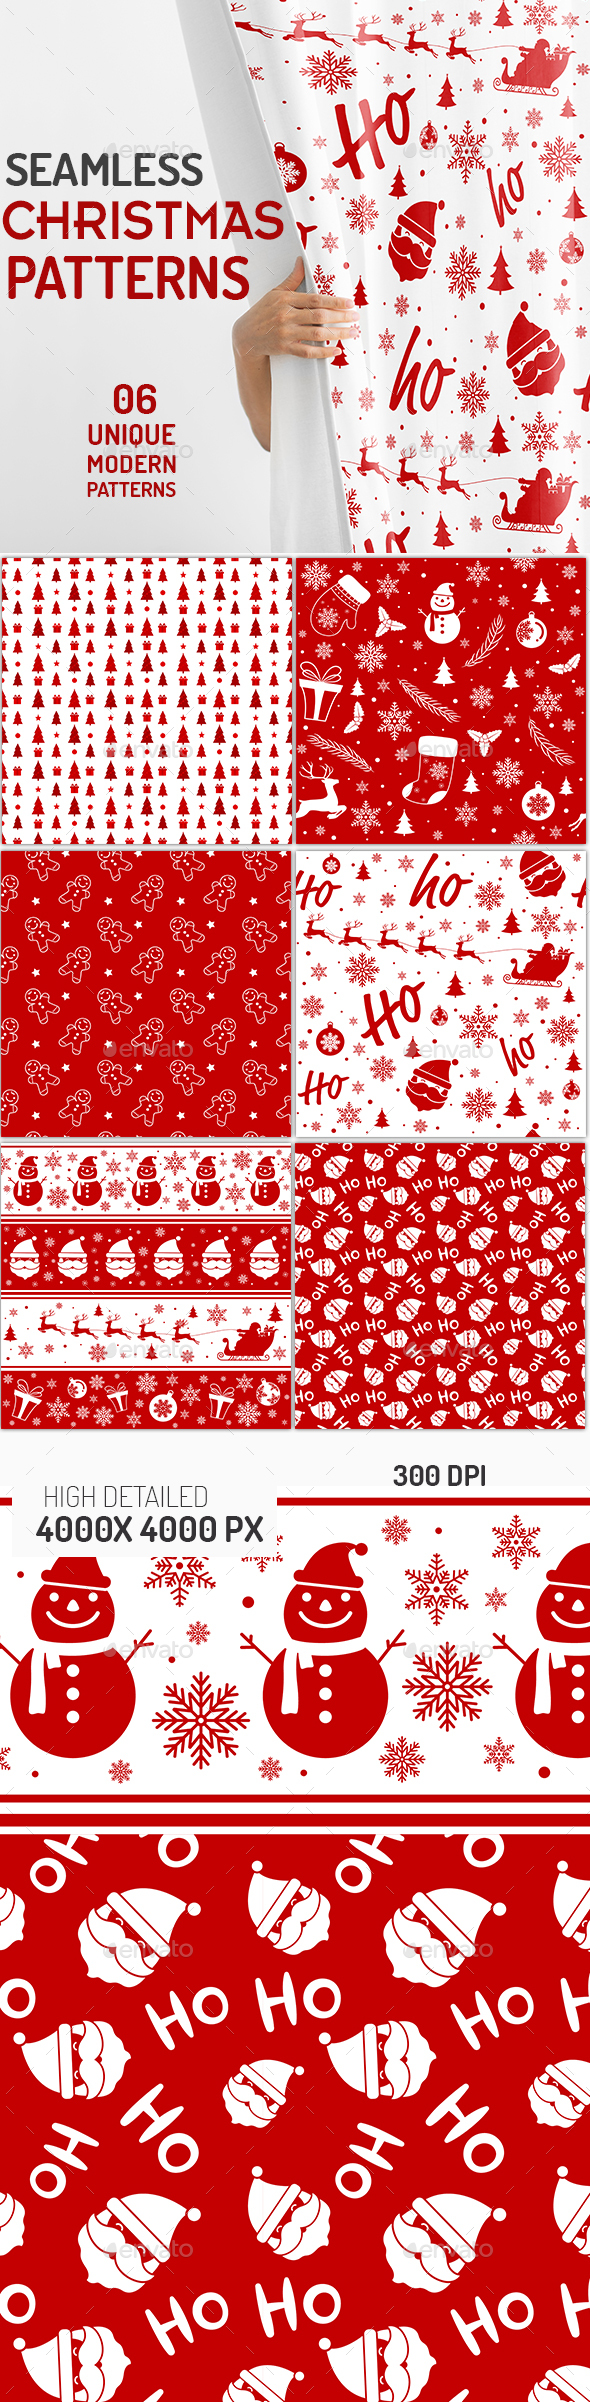 [DOWNLOAD]Christmas Seamless Patterns